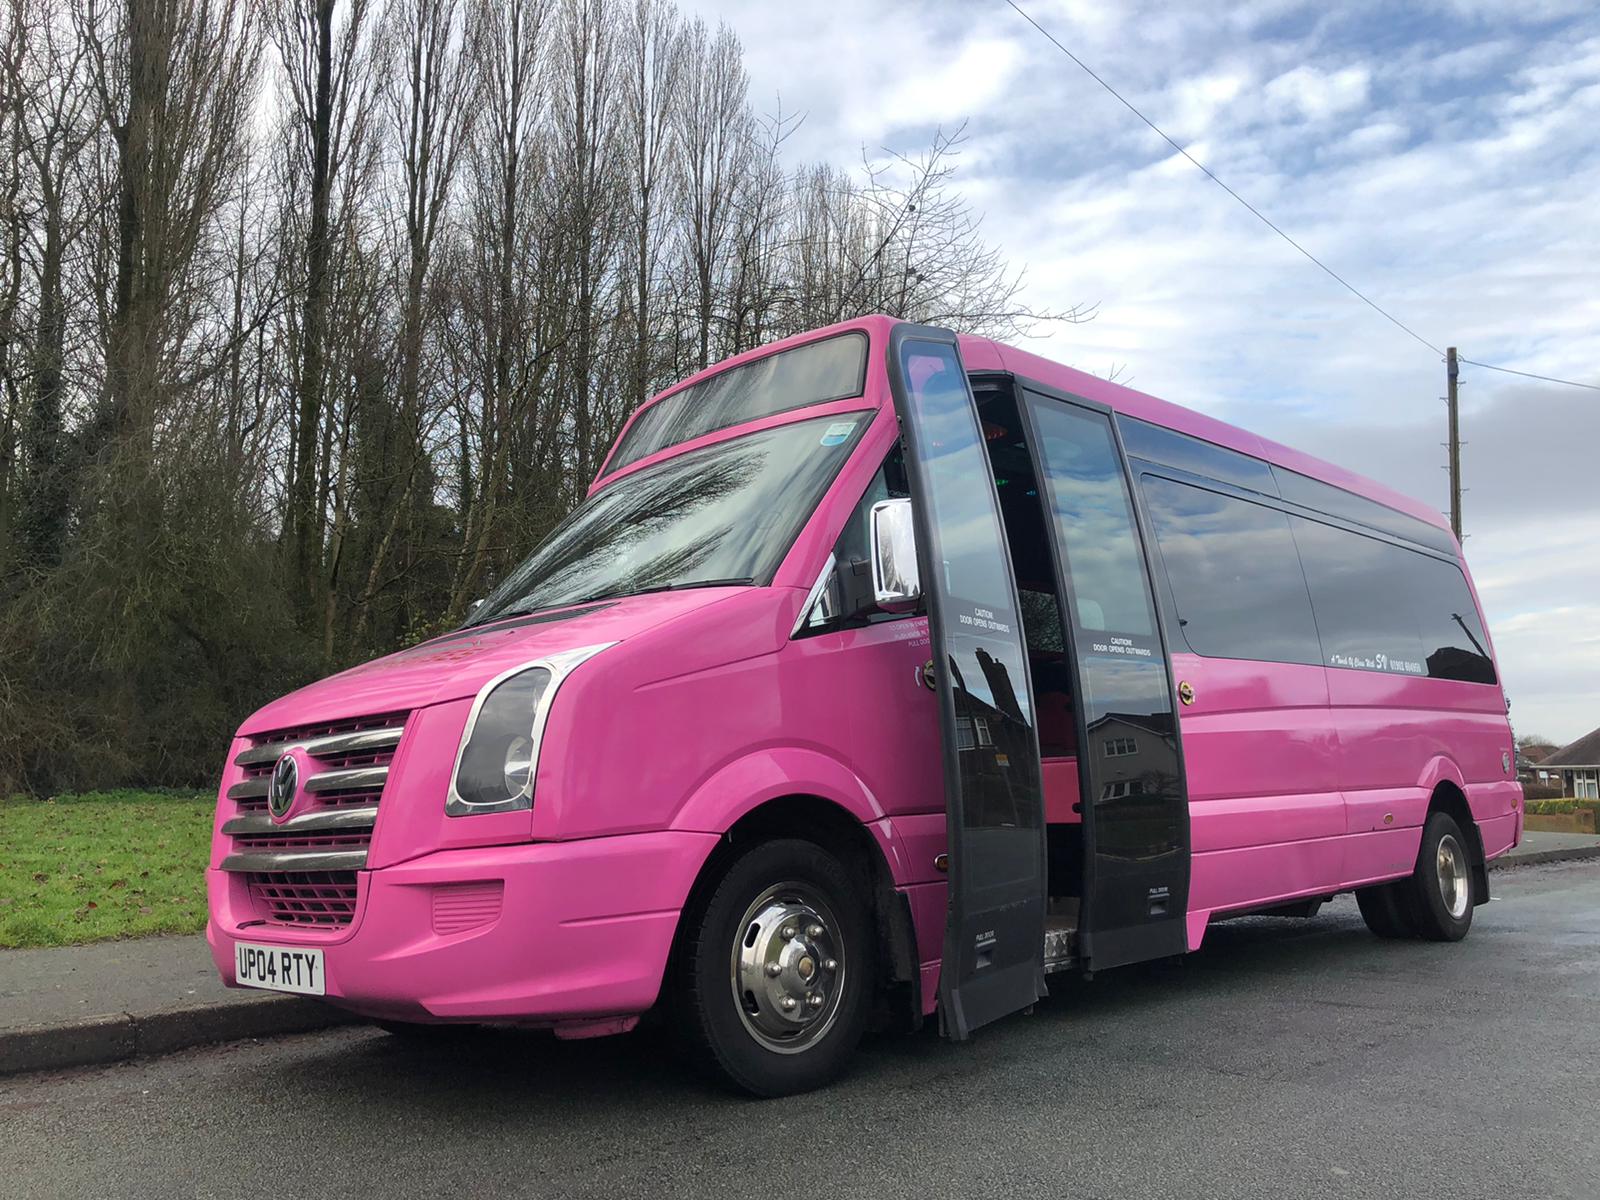 Top Tips for Planning a Memorable Stag Party on Wheels in the UK